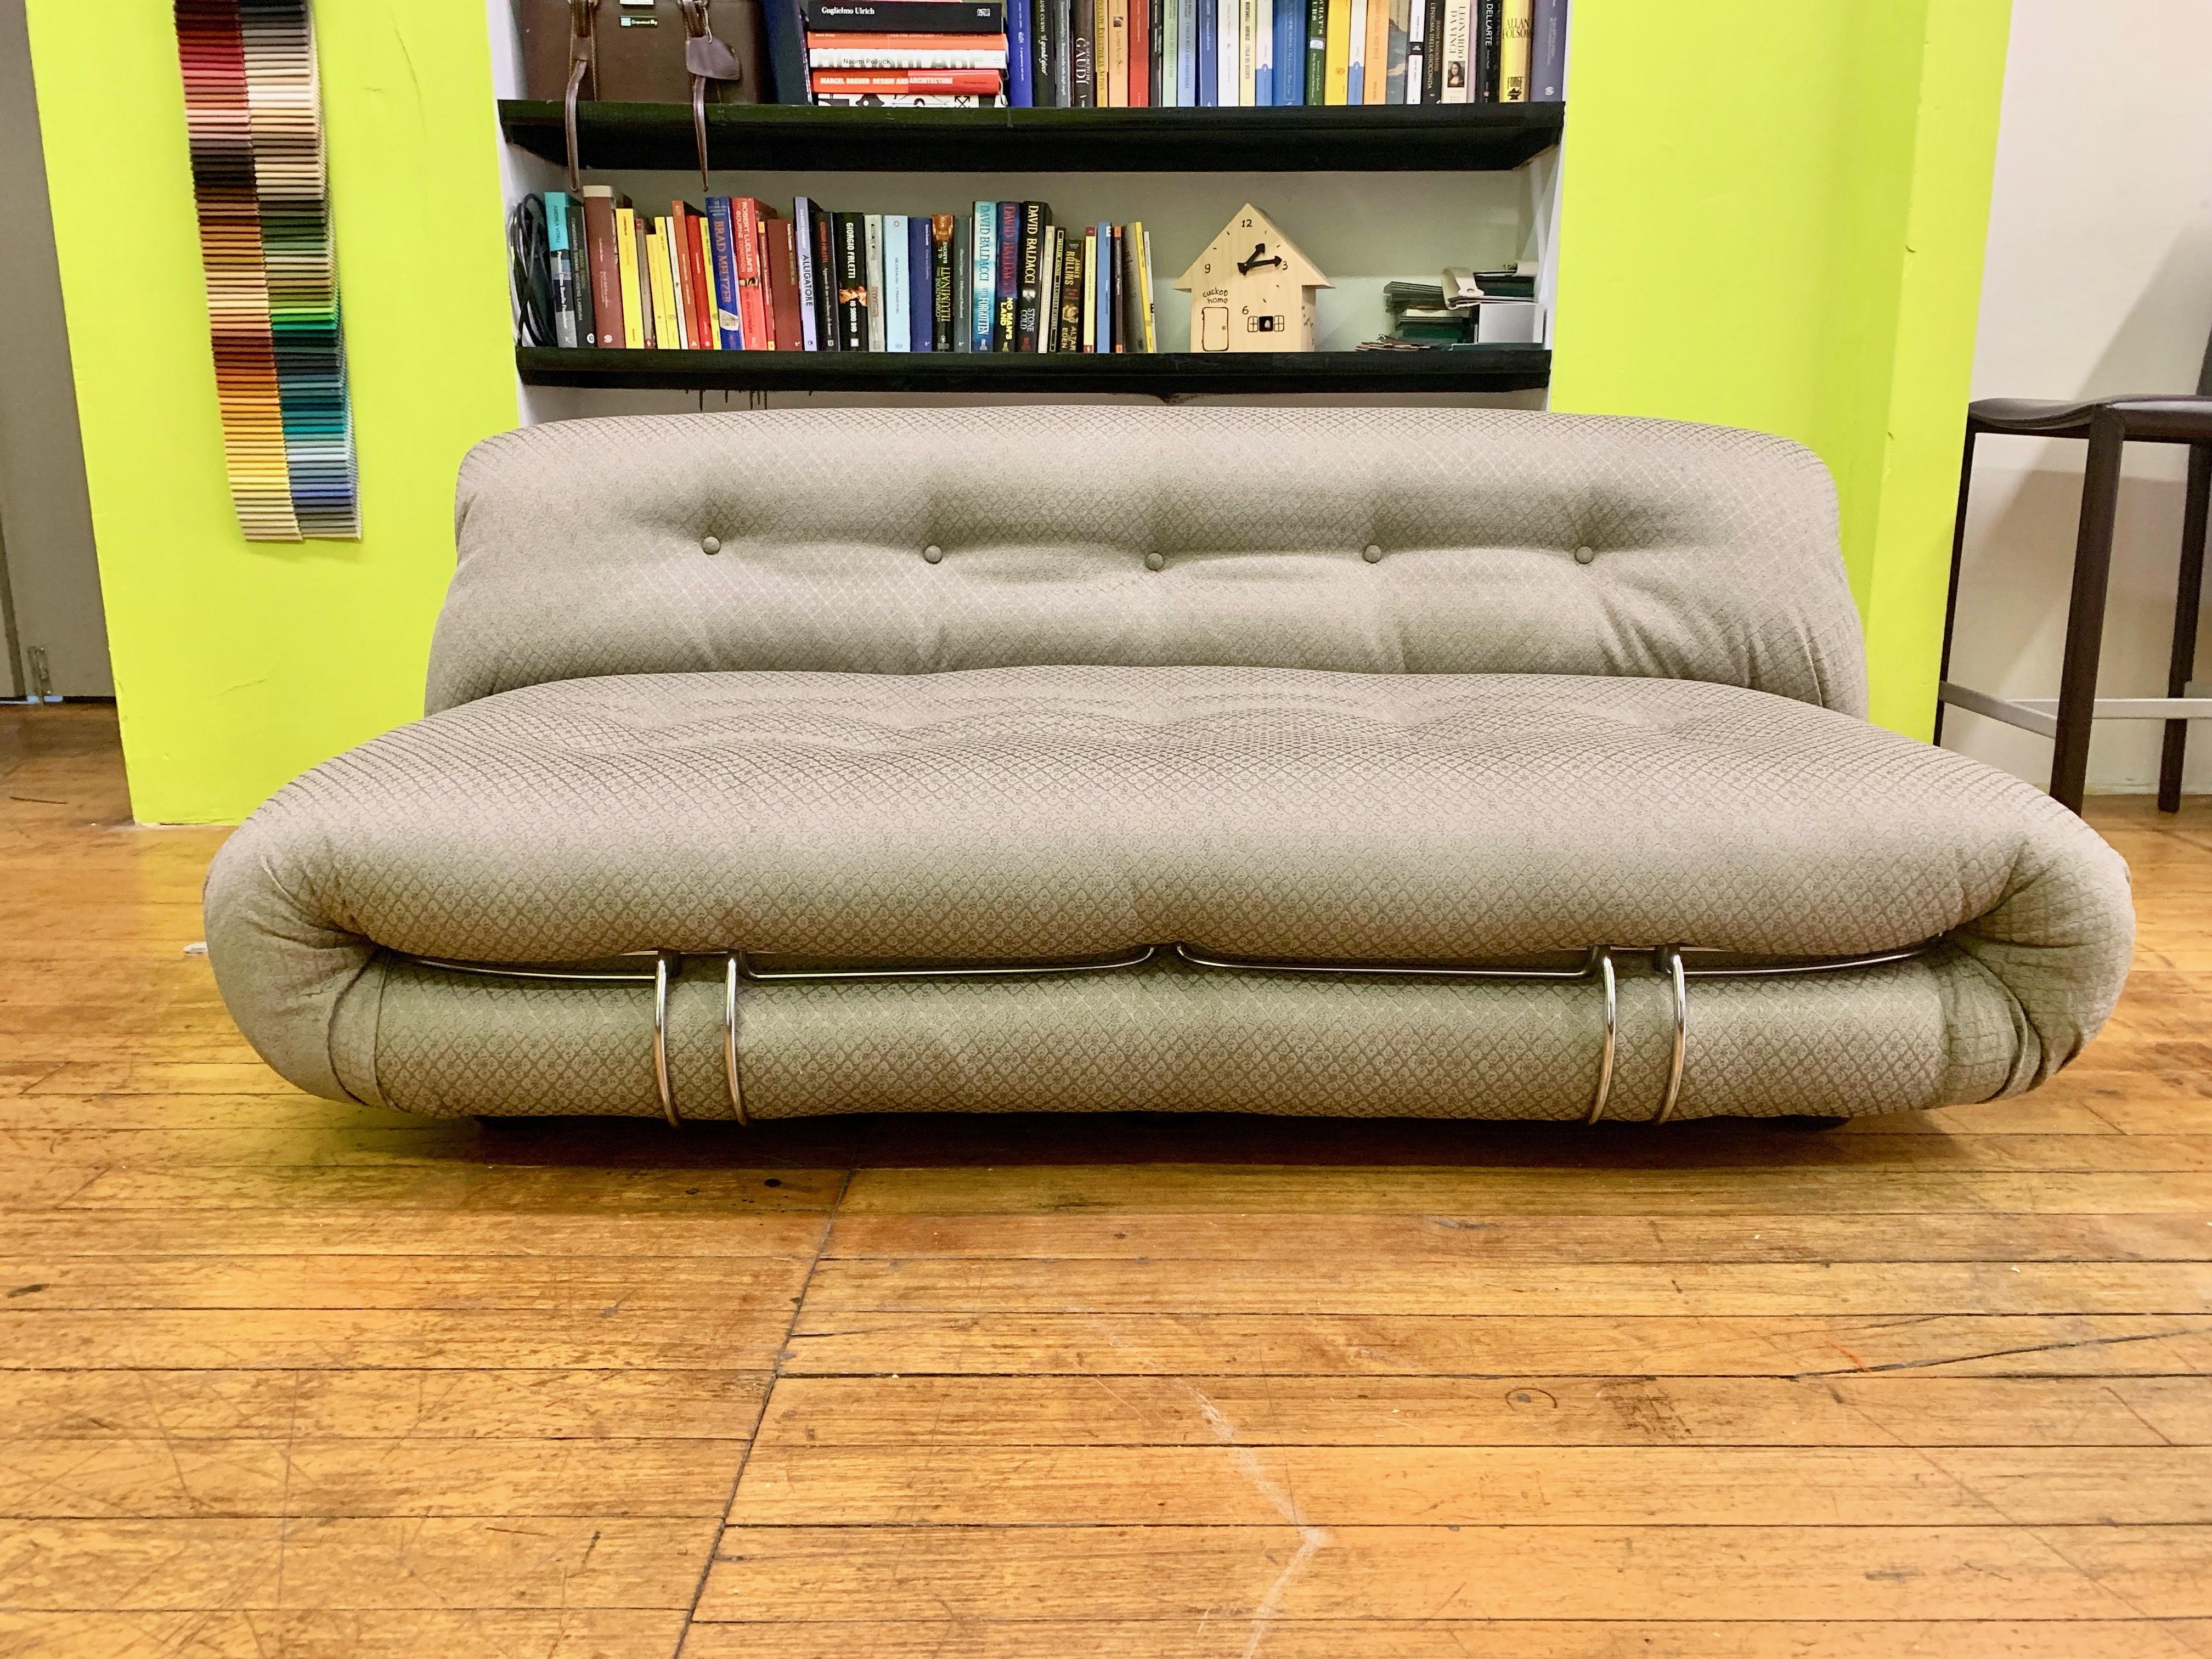 Soriana sofa design Tobia Scarpa for Cassina 1976, licensed by Cassina for Atelier International, fabric upholstery good condition consistent with age and use. Medium Sofa version with two front metal clamps. Matching medium size sofa available in a